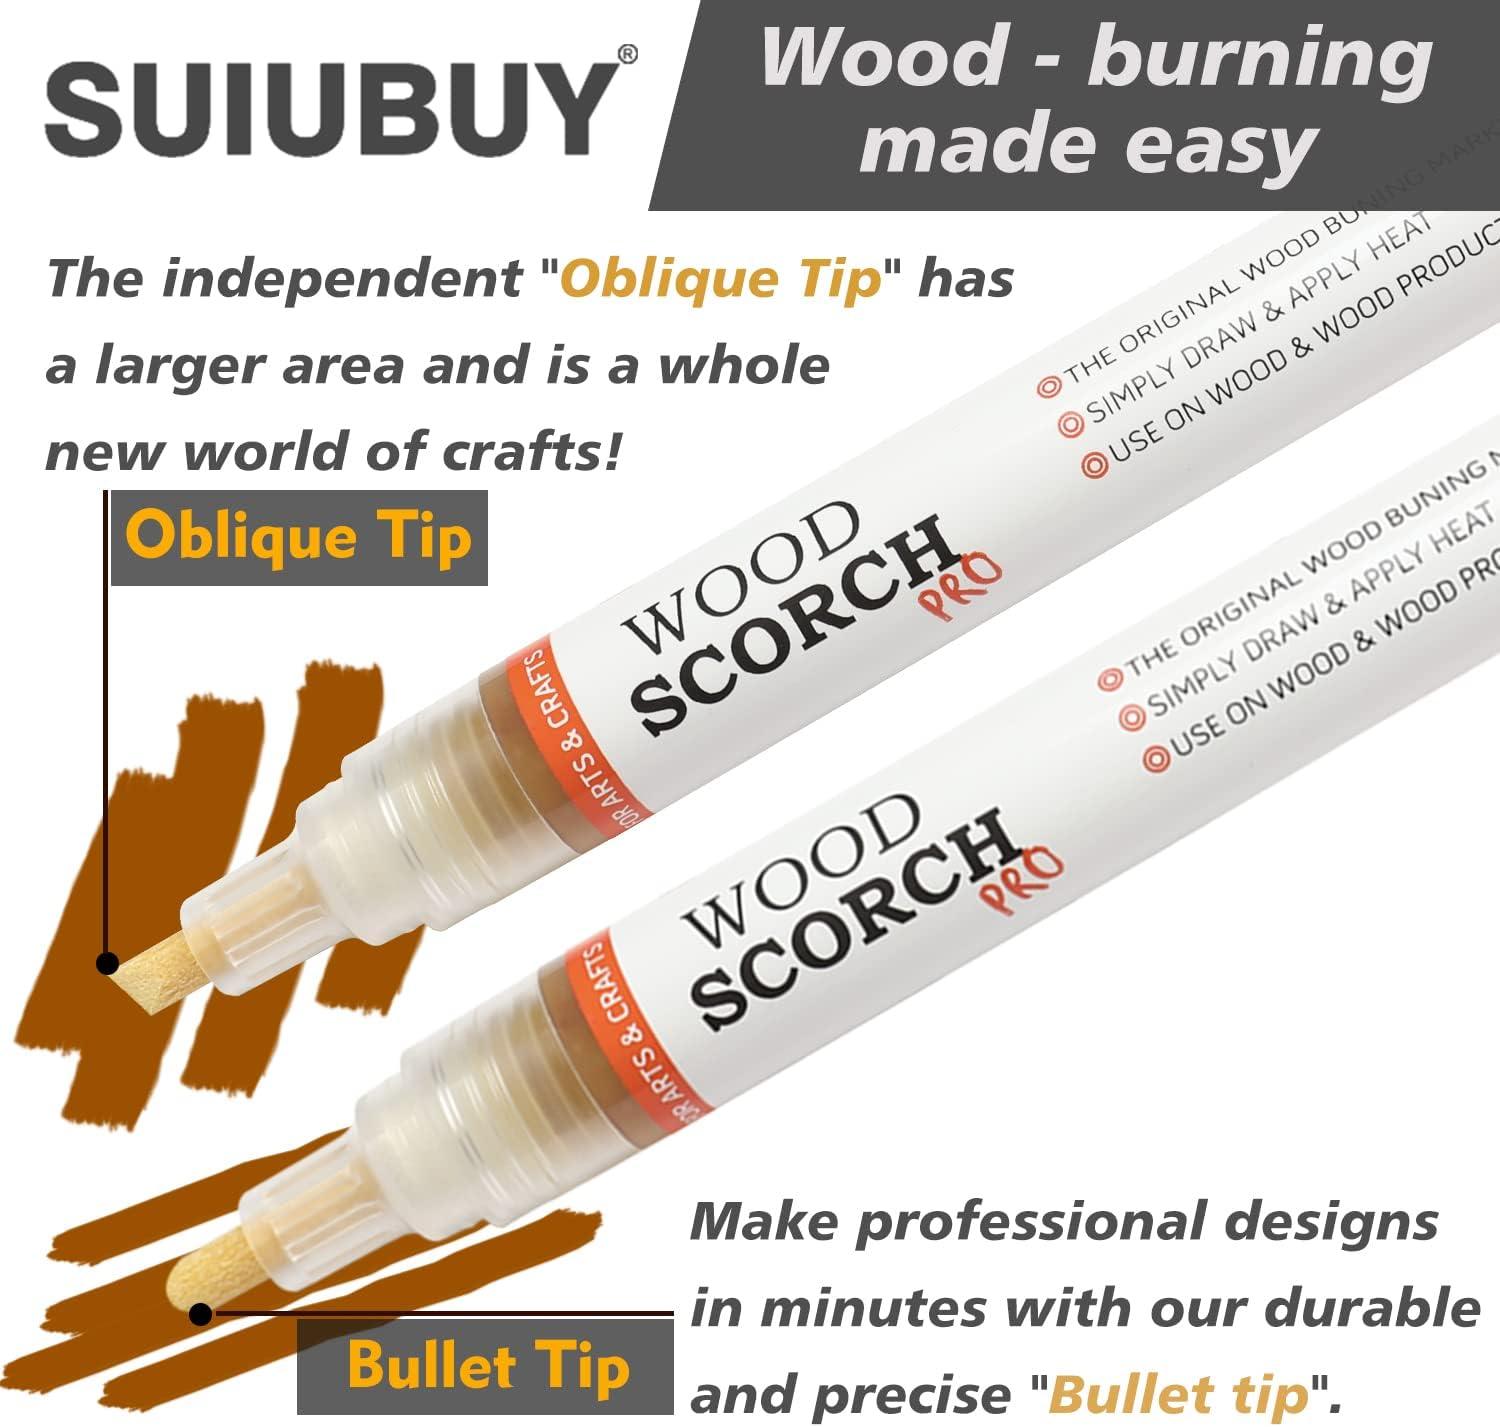 4 Tips for Staying Safe While Wood-burning - Scorch Marker